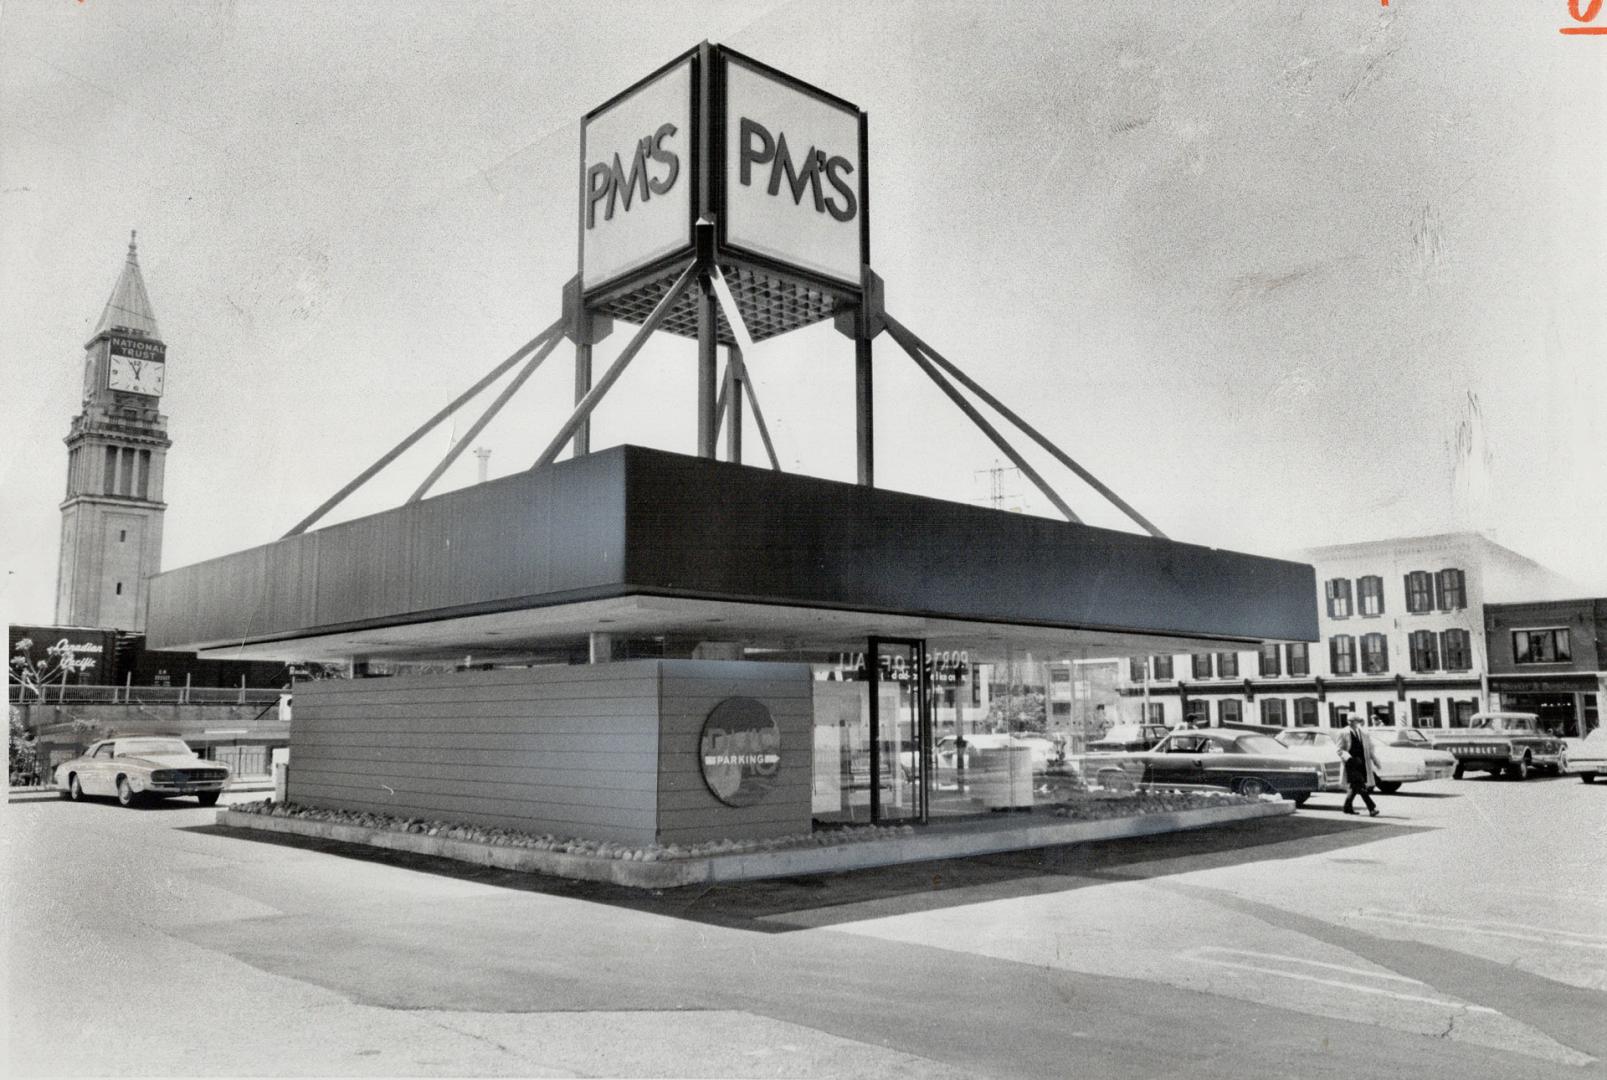 PM's drive-in on Yonge St. near Summerhill isn't the usual drive-in restaurant, says architect Harvey Cowan. PM's is a sophisticated drive-in, featuri(...)